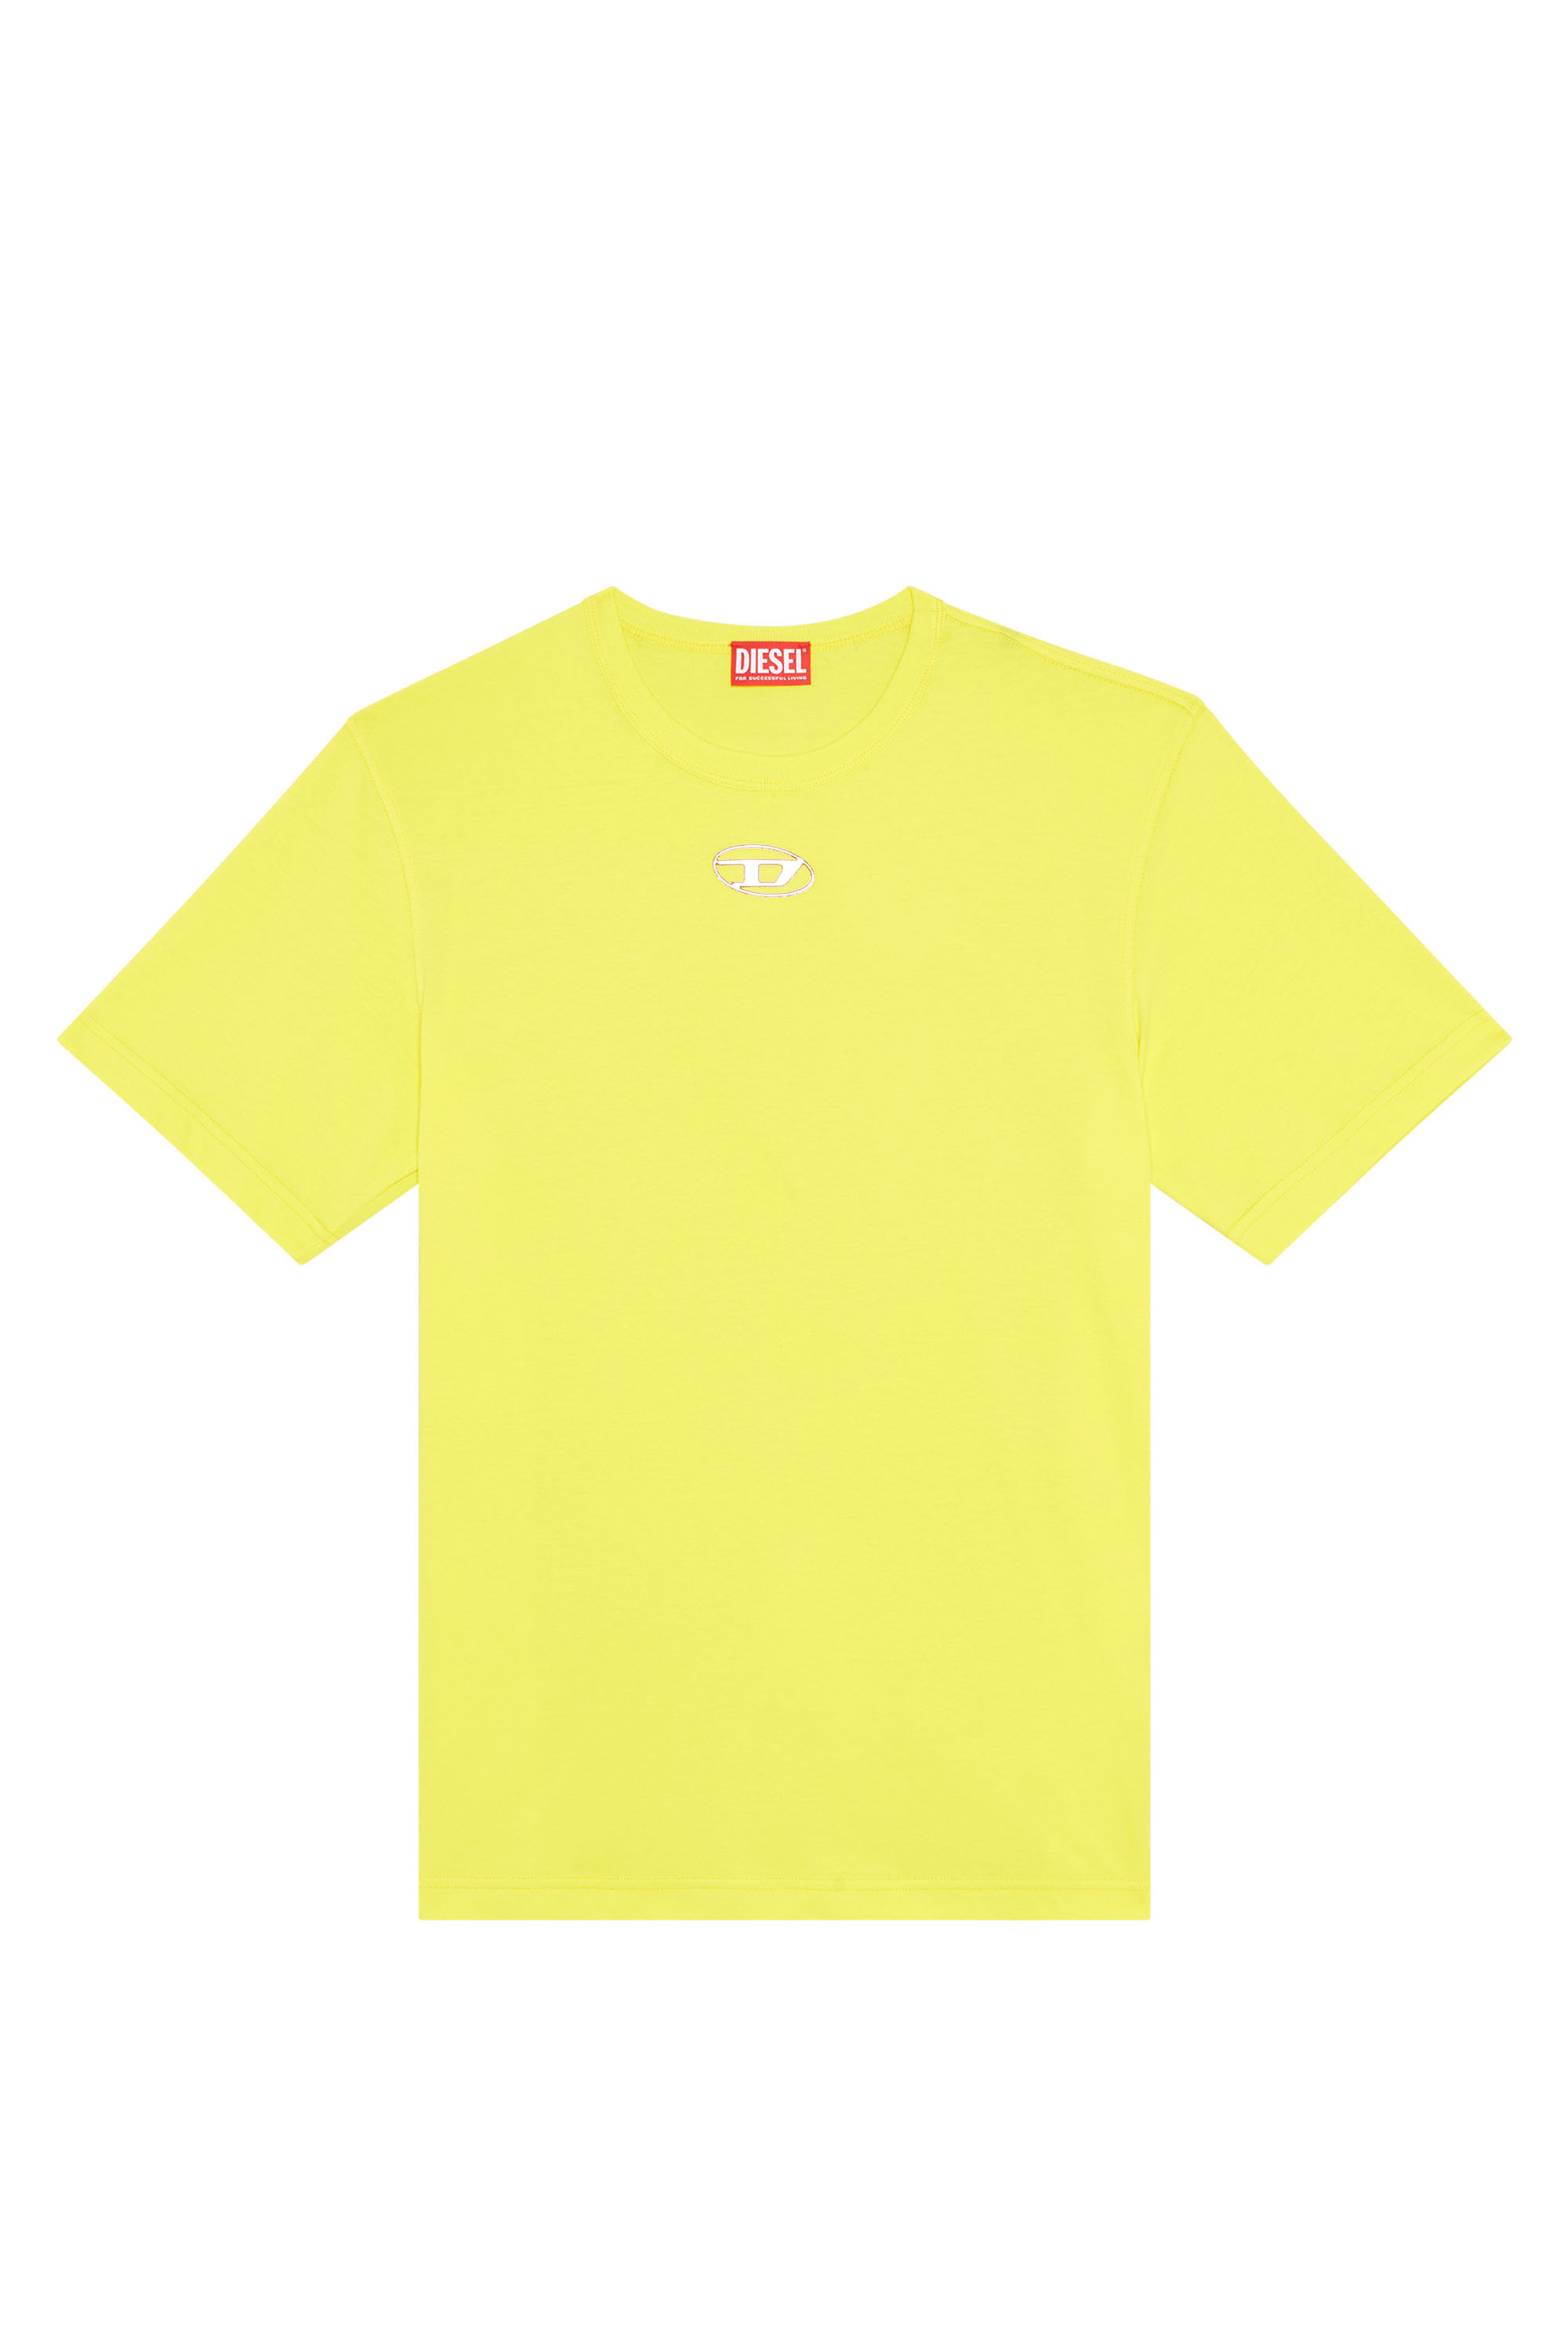 Diesel - T-JUST-OD, Yellow - Image 5